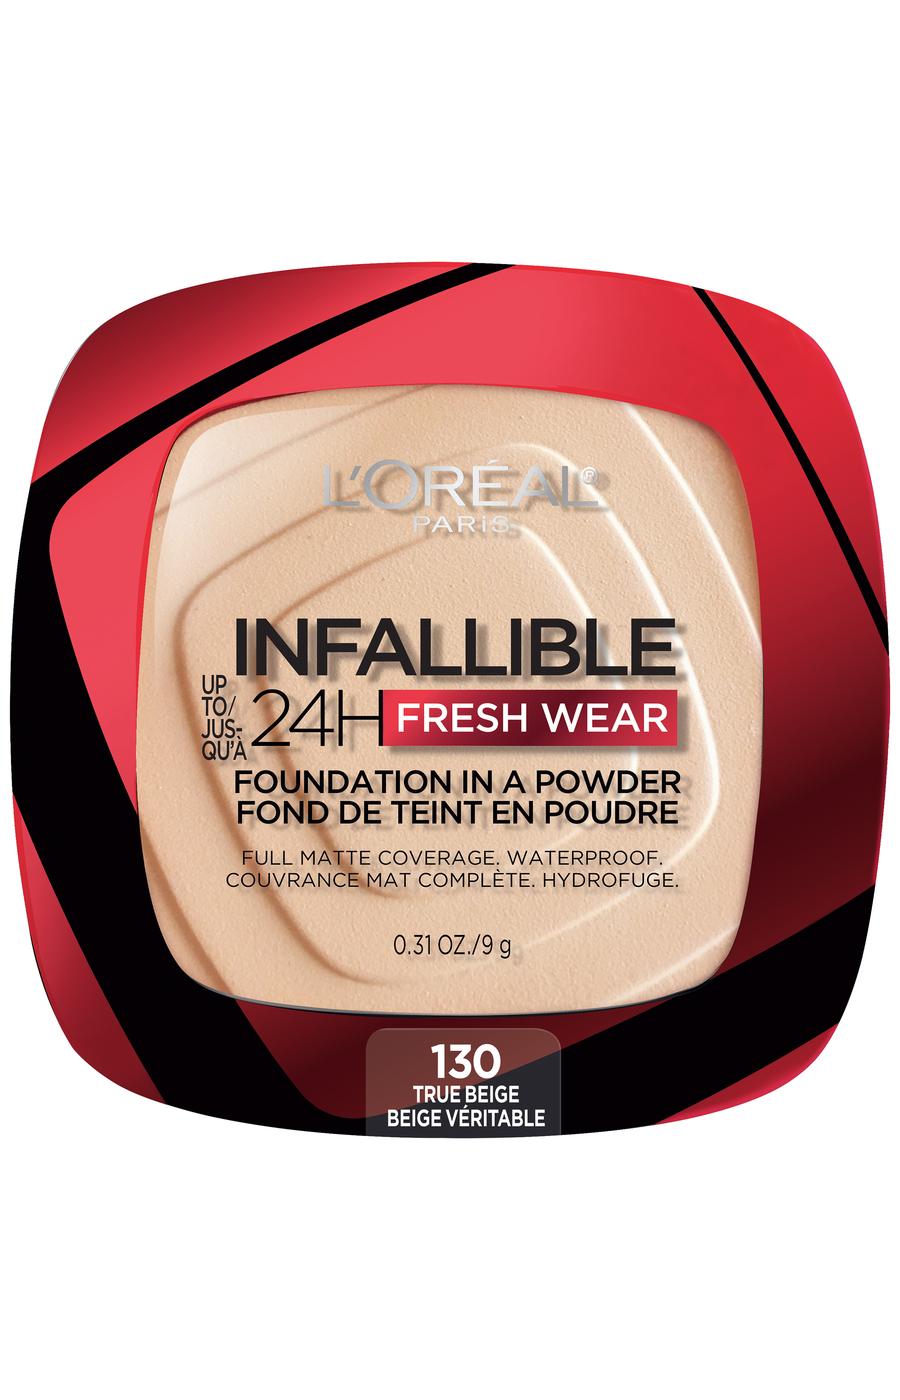 L'Oréal Paris Infallible Up to 24H Fresh Wear Foundation in a Powder True Beige; image 1 of 4